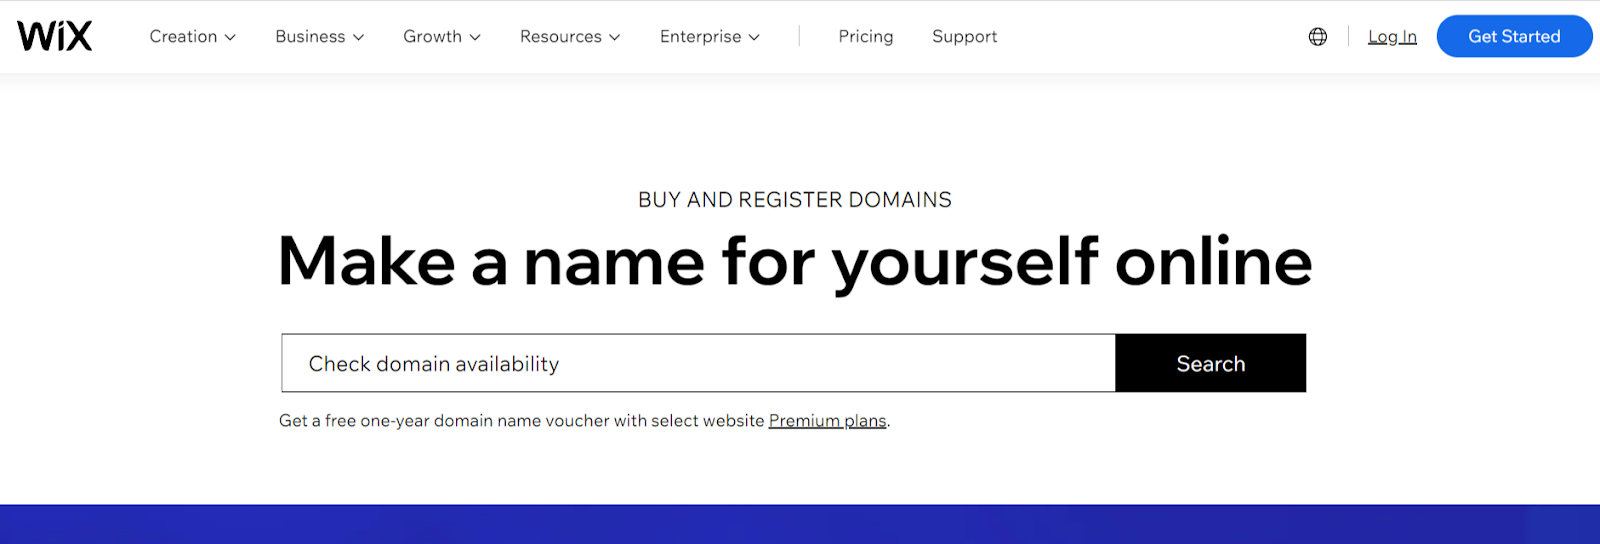 Free Domain for One Year